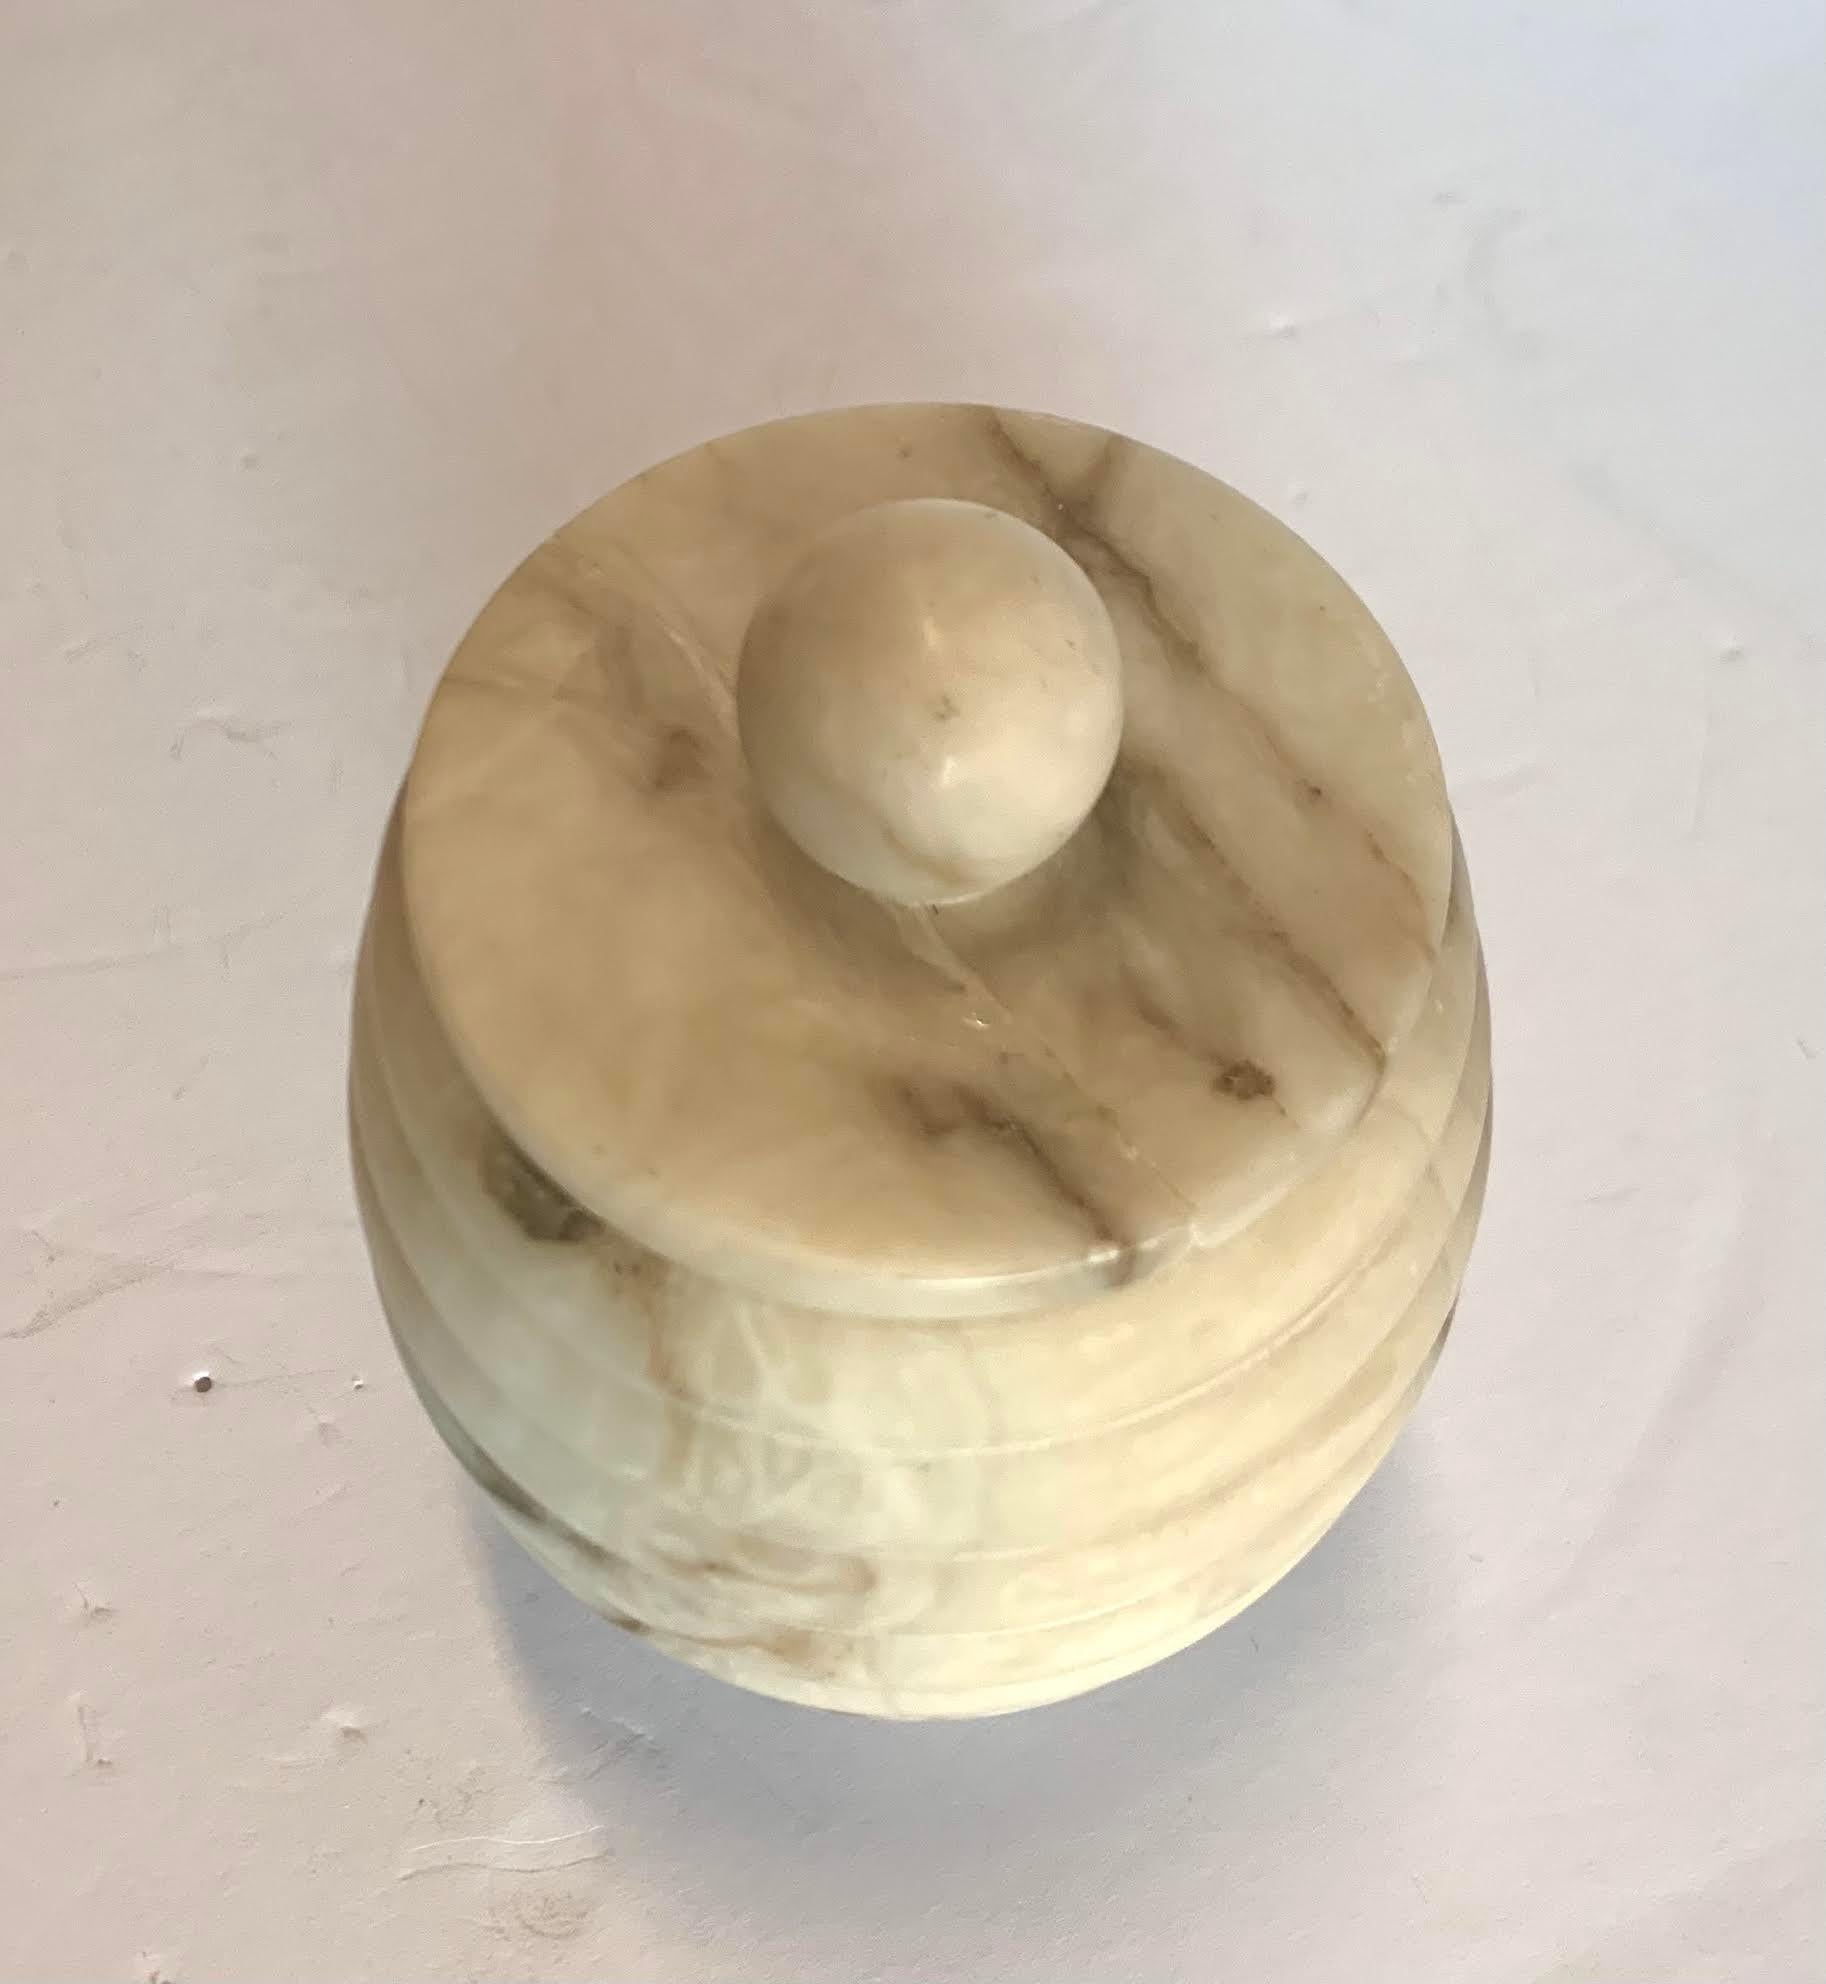 Italian lidded alabaster jar with ribbed decorative detailing.
Can be combined with several others to make a gradated set.
Lid has been repaired.